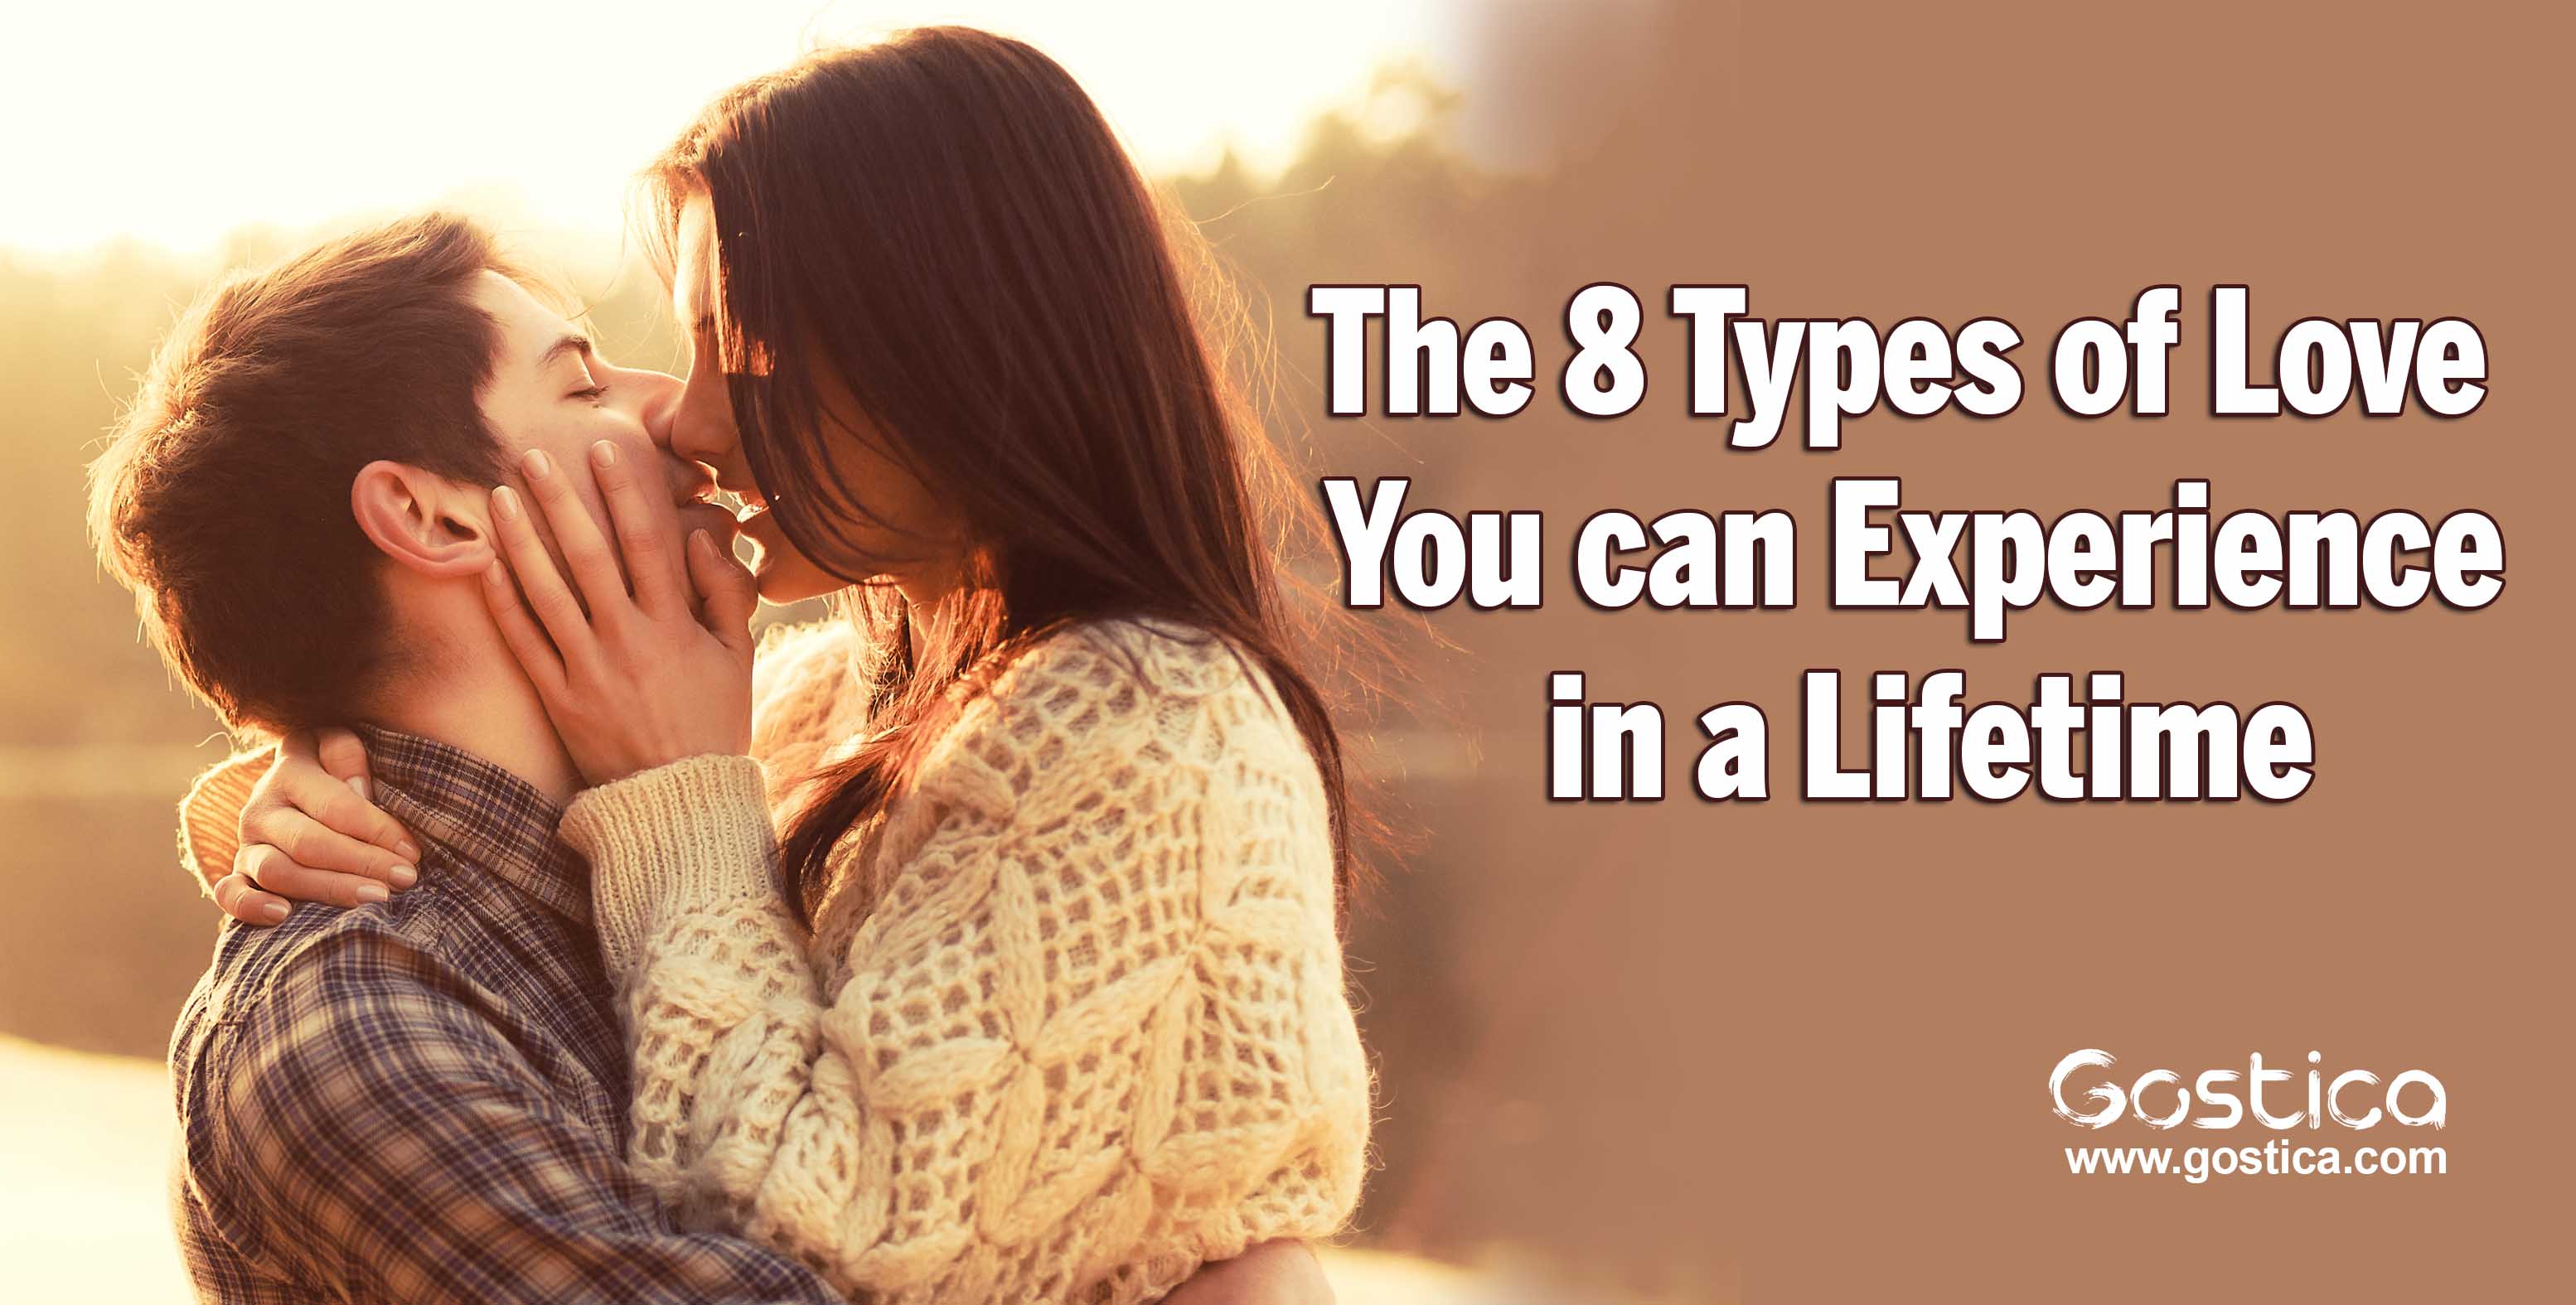 The-8-Types-of-Love-You-can-Experience-in-a-Lifetime.jpg